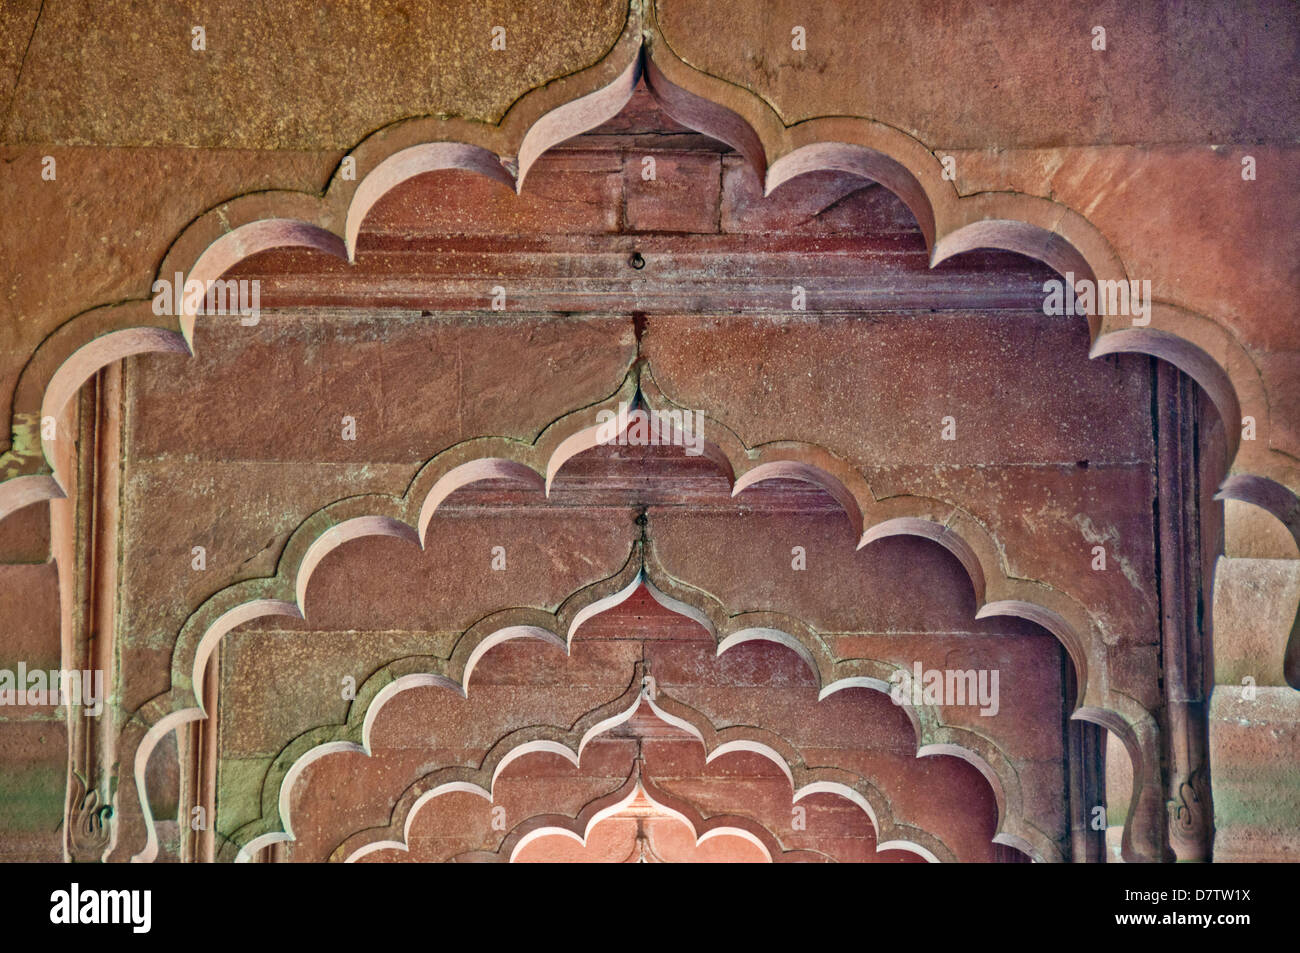 Architectural detail of arches in the 'Mail Hall' in the 'Hall of Public Audience' in the Red Fort in Delhi, India Stock Photo